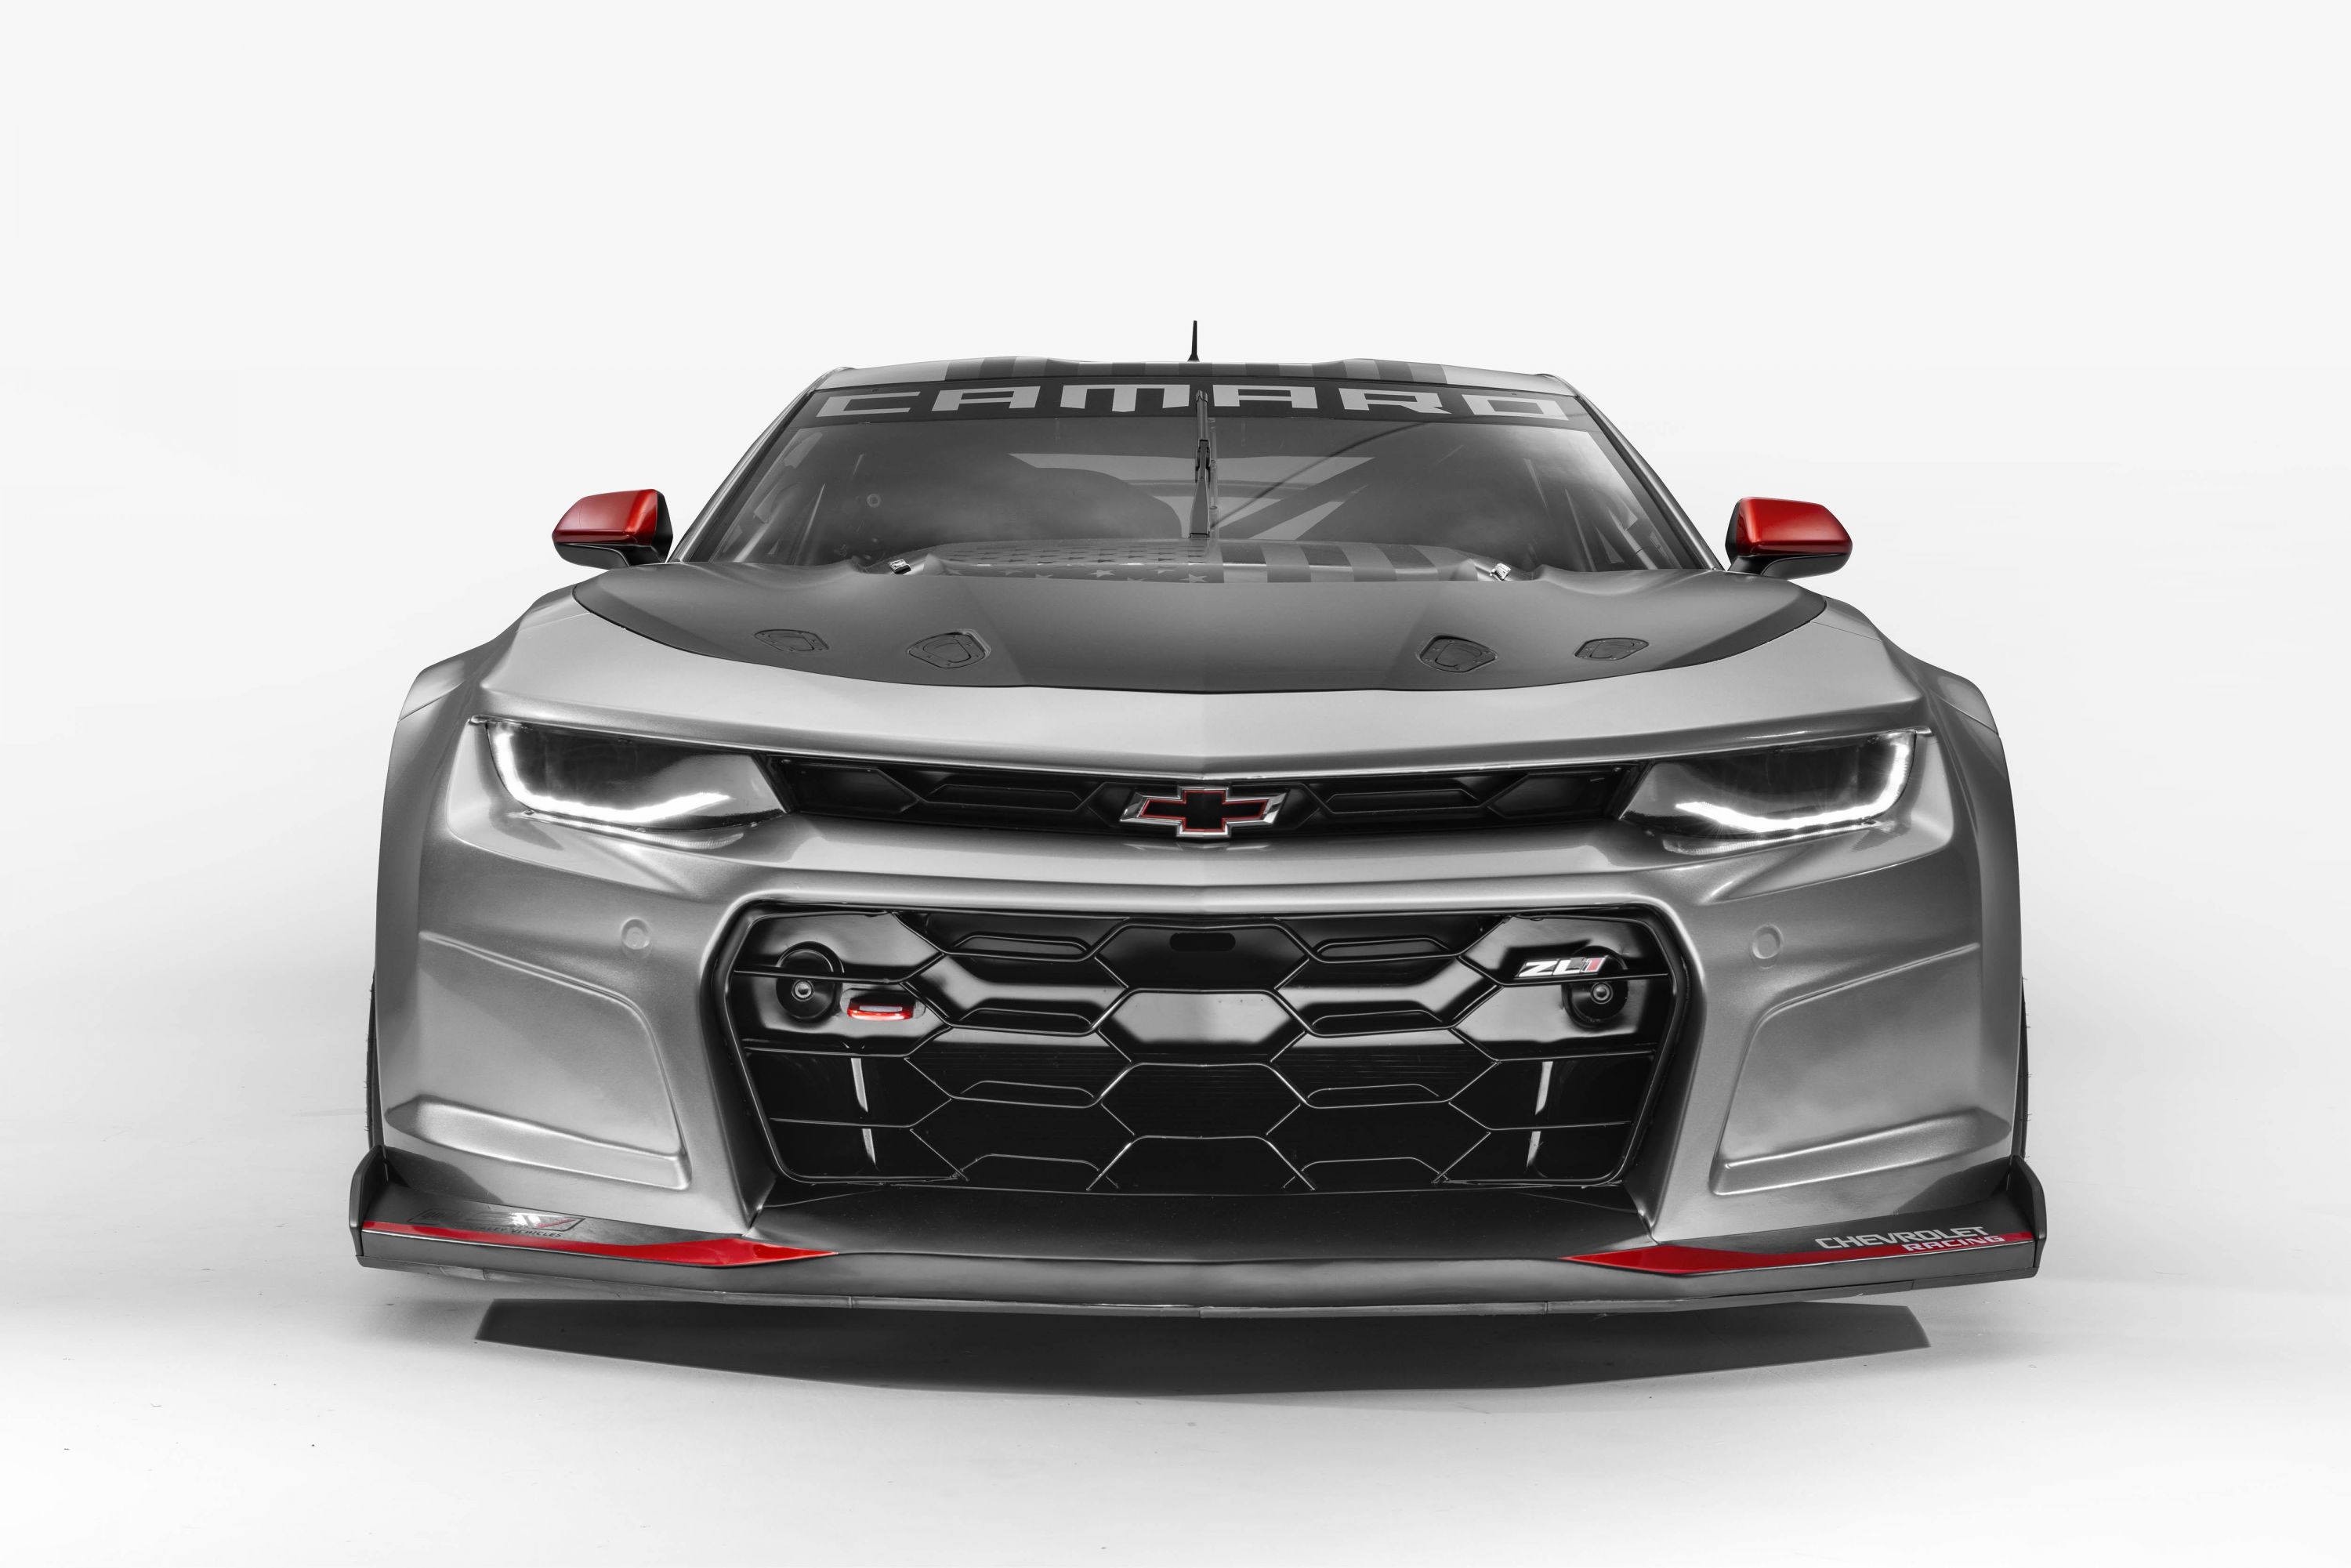 Chevrolet Camaro and Cadillac Escalade to gain new body styles - report |  CarExpert